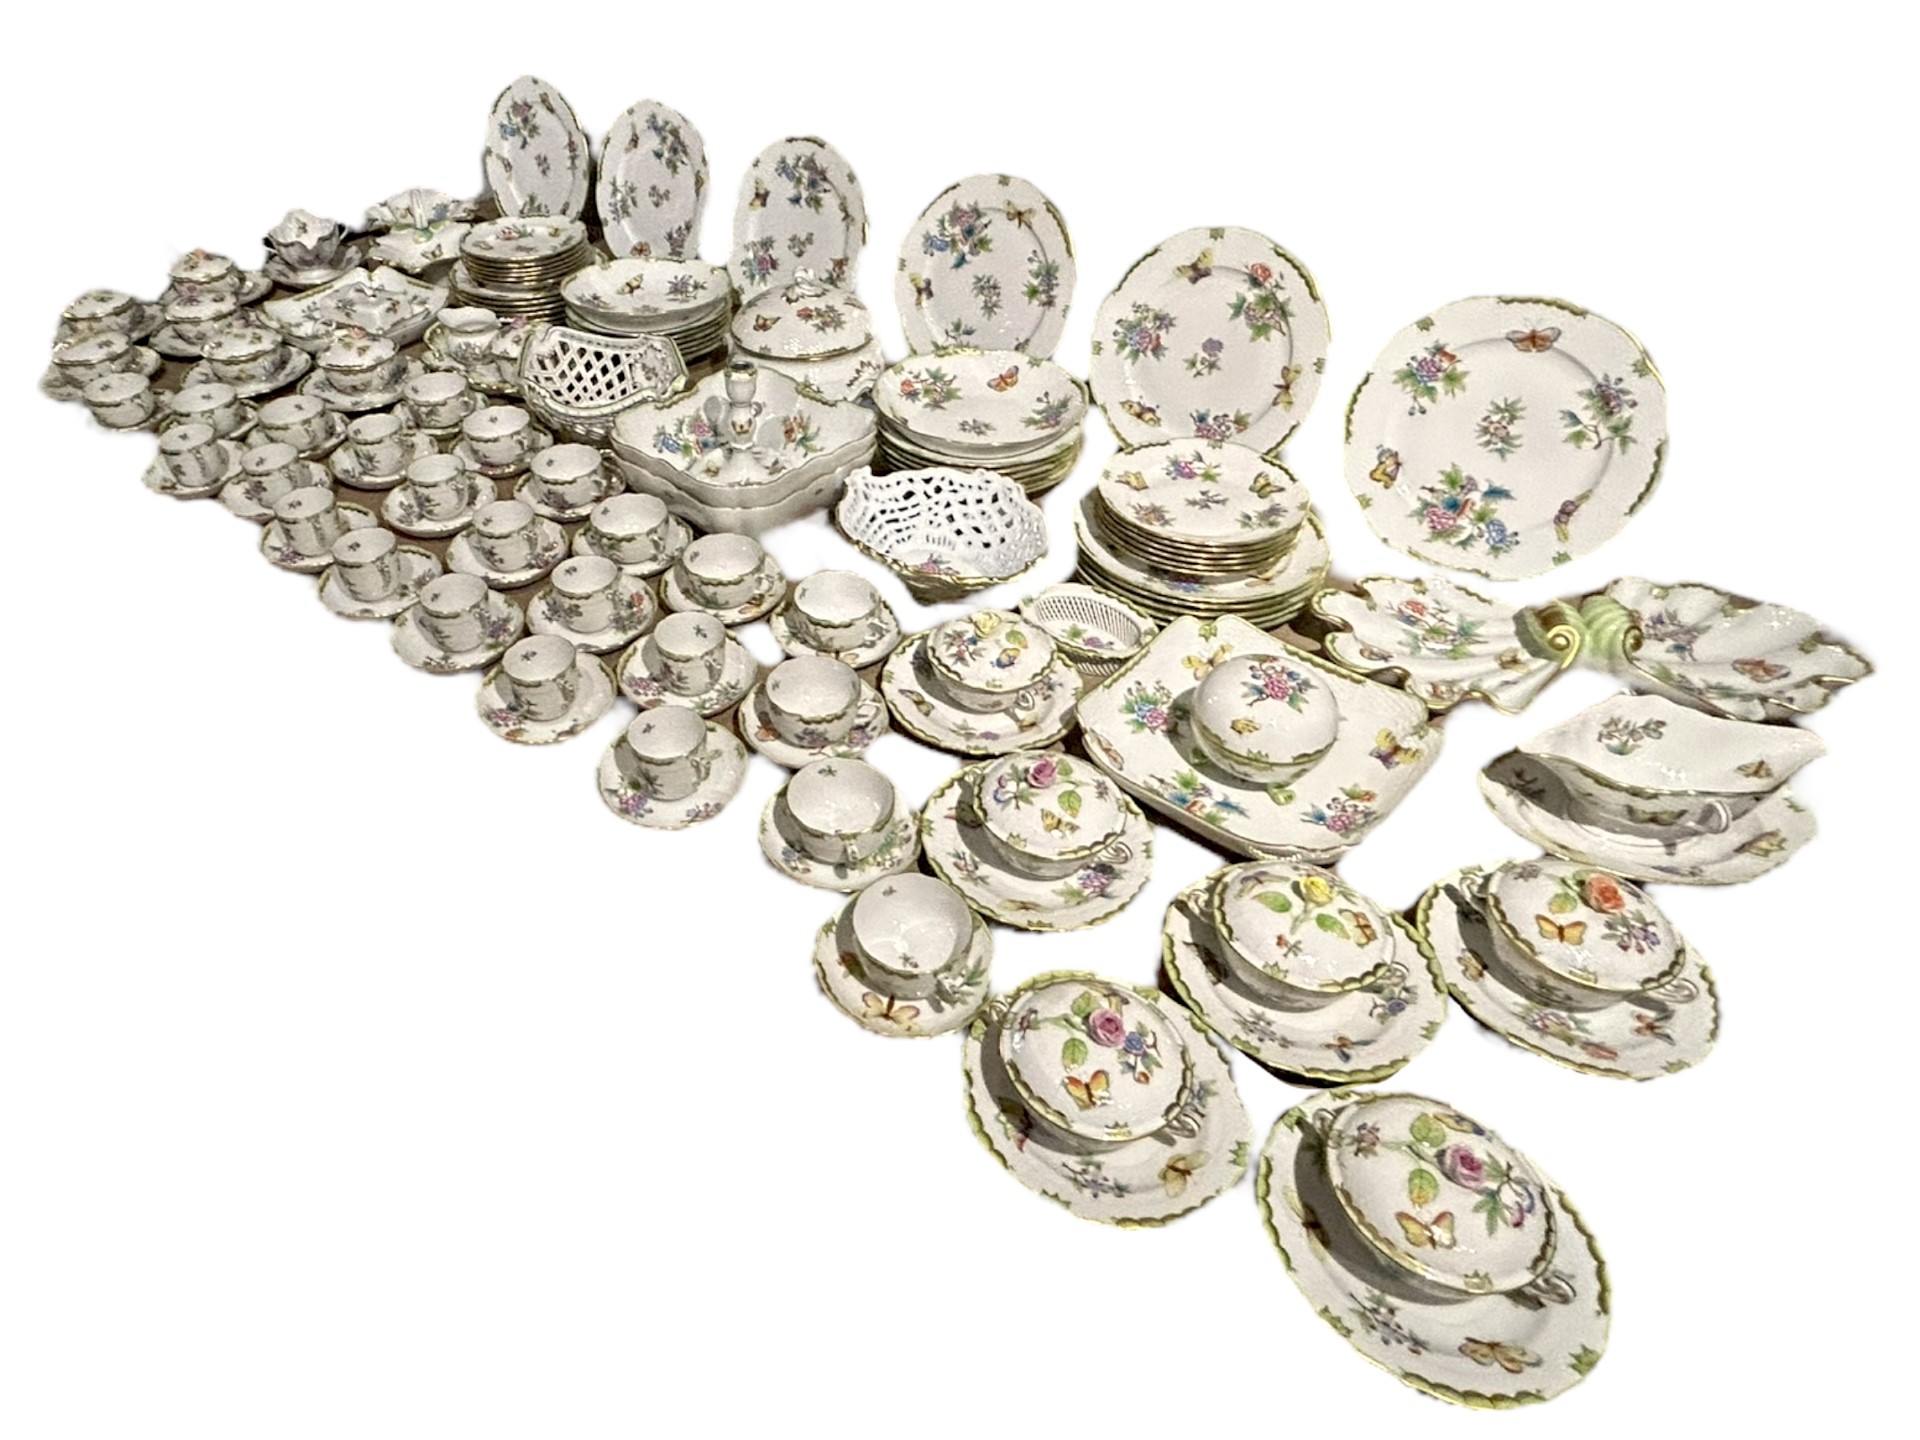 HEREND, HUNGARY, AN EXTENSIVE COLLECTION OF 20TH CENTURY ‘QUEEN VICTORIA’ PATTERN PORCELAIN PART - Image 3 of 8